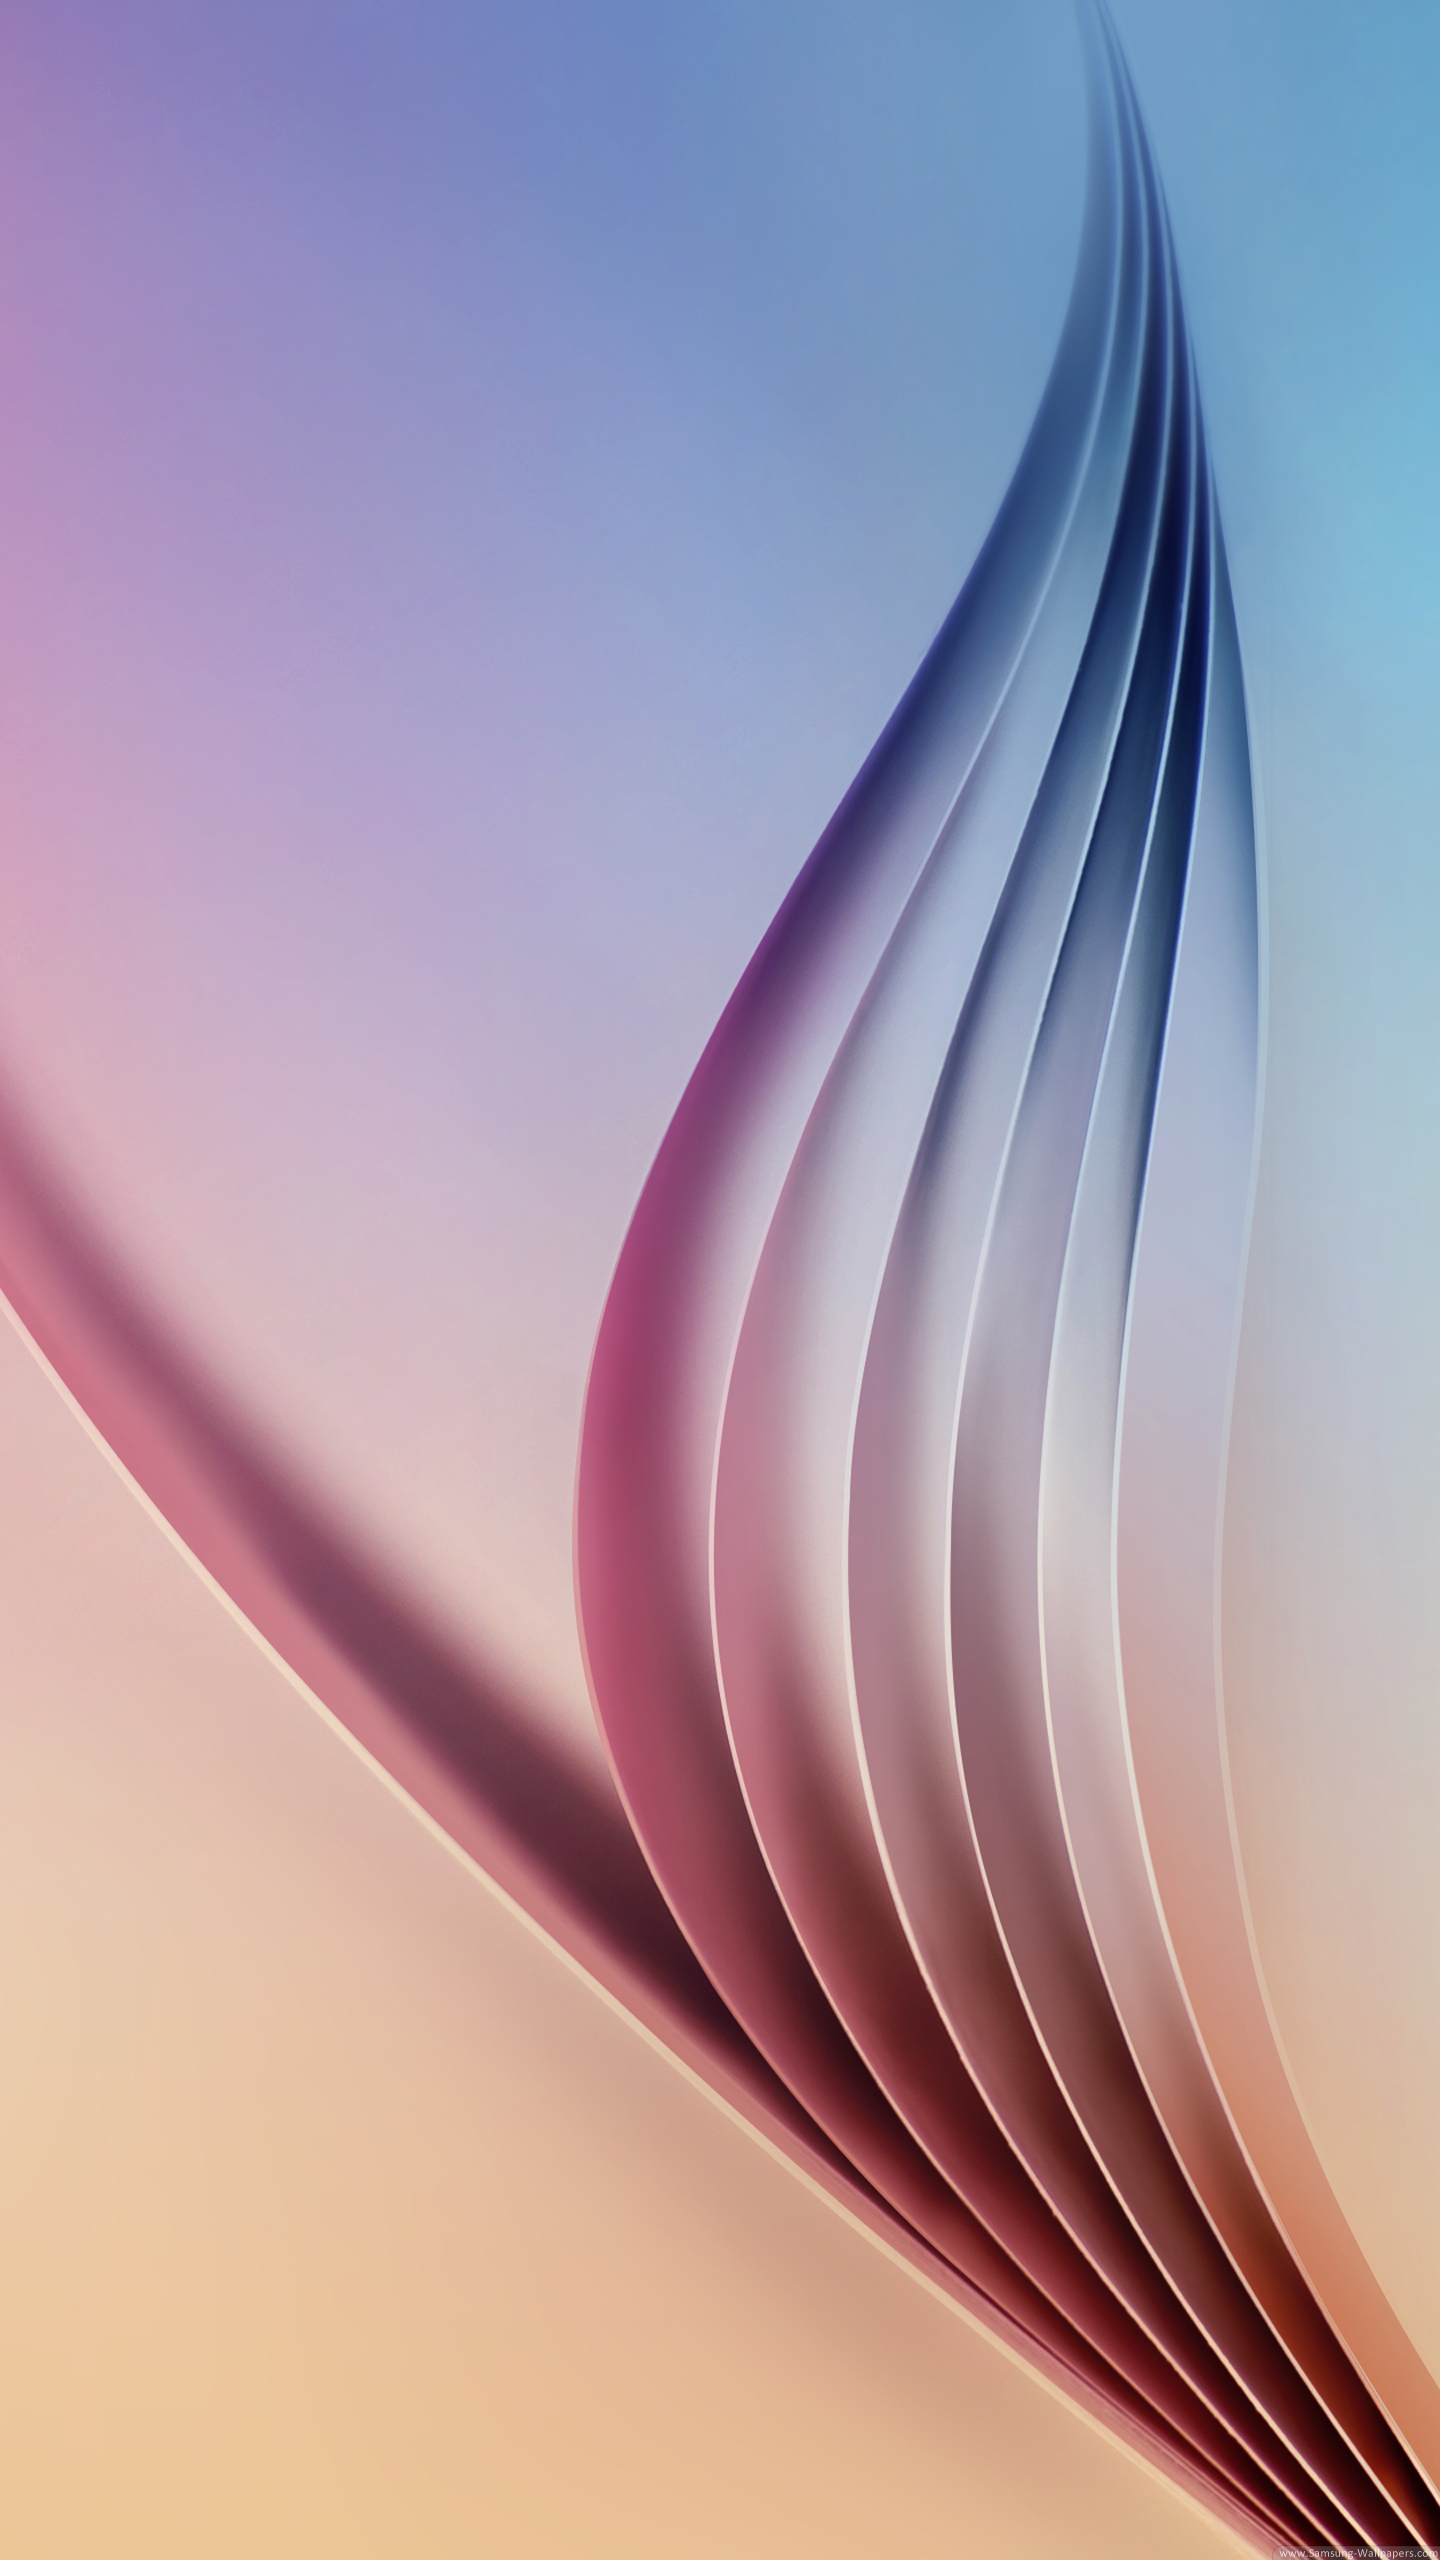 Free download Get the new Galaxy S6 apps and wallpapers here [1440x2560